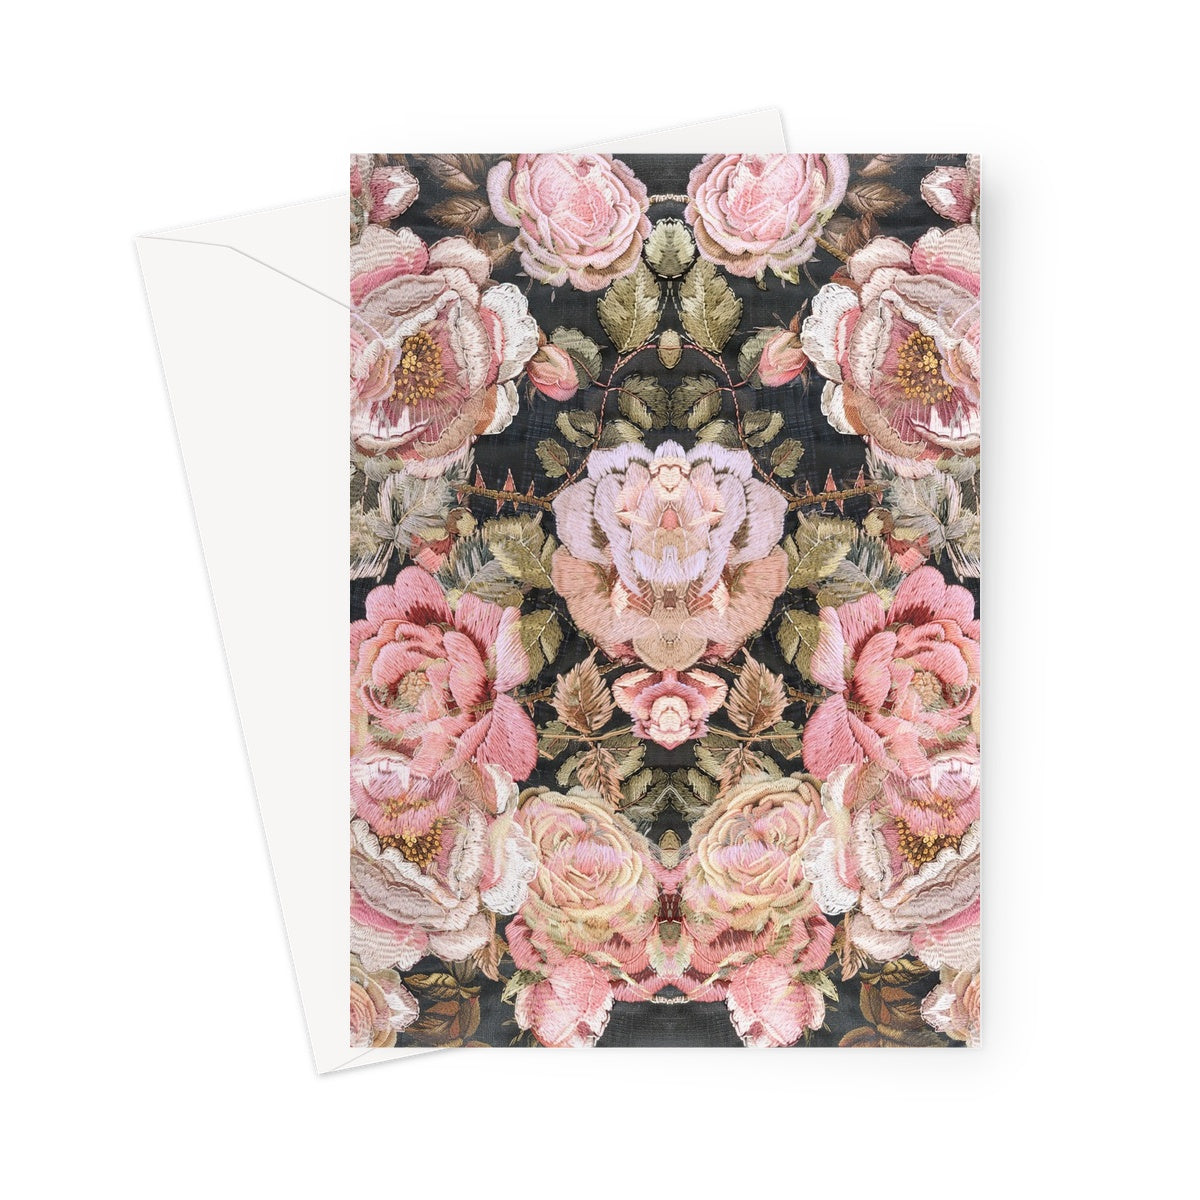 It's all Roses Greeting Card - Starseed Designs Inc.